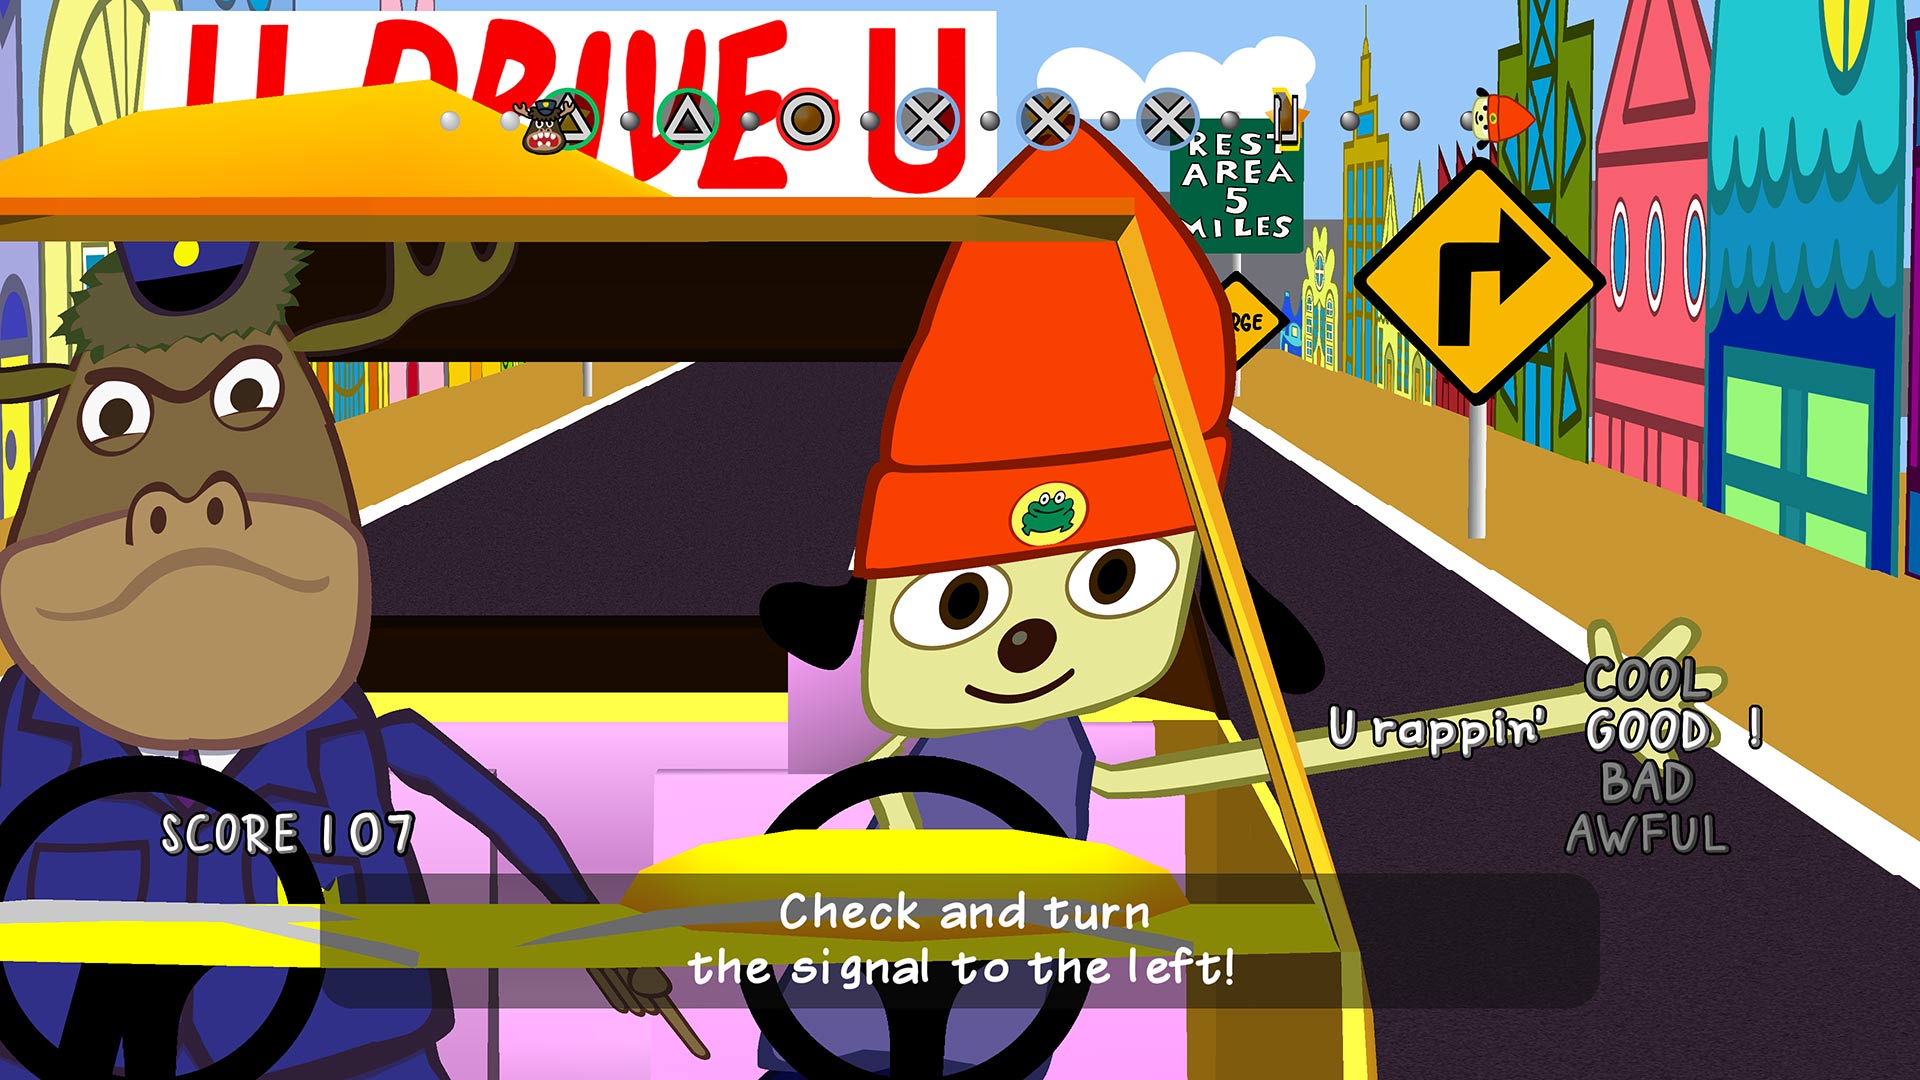 A new PaRappa? Oh...